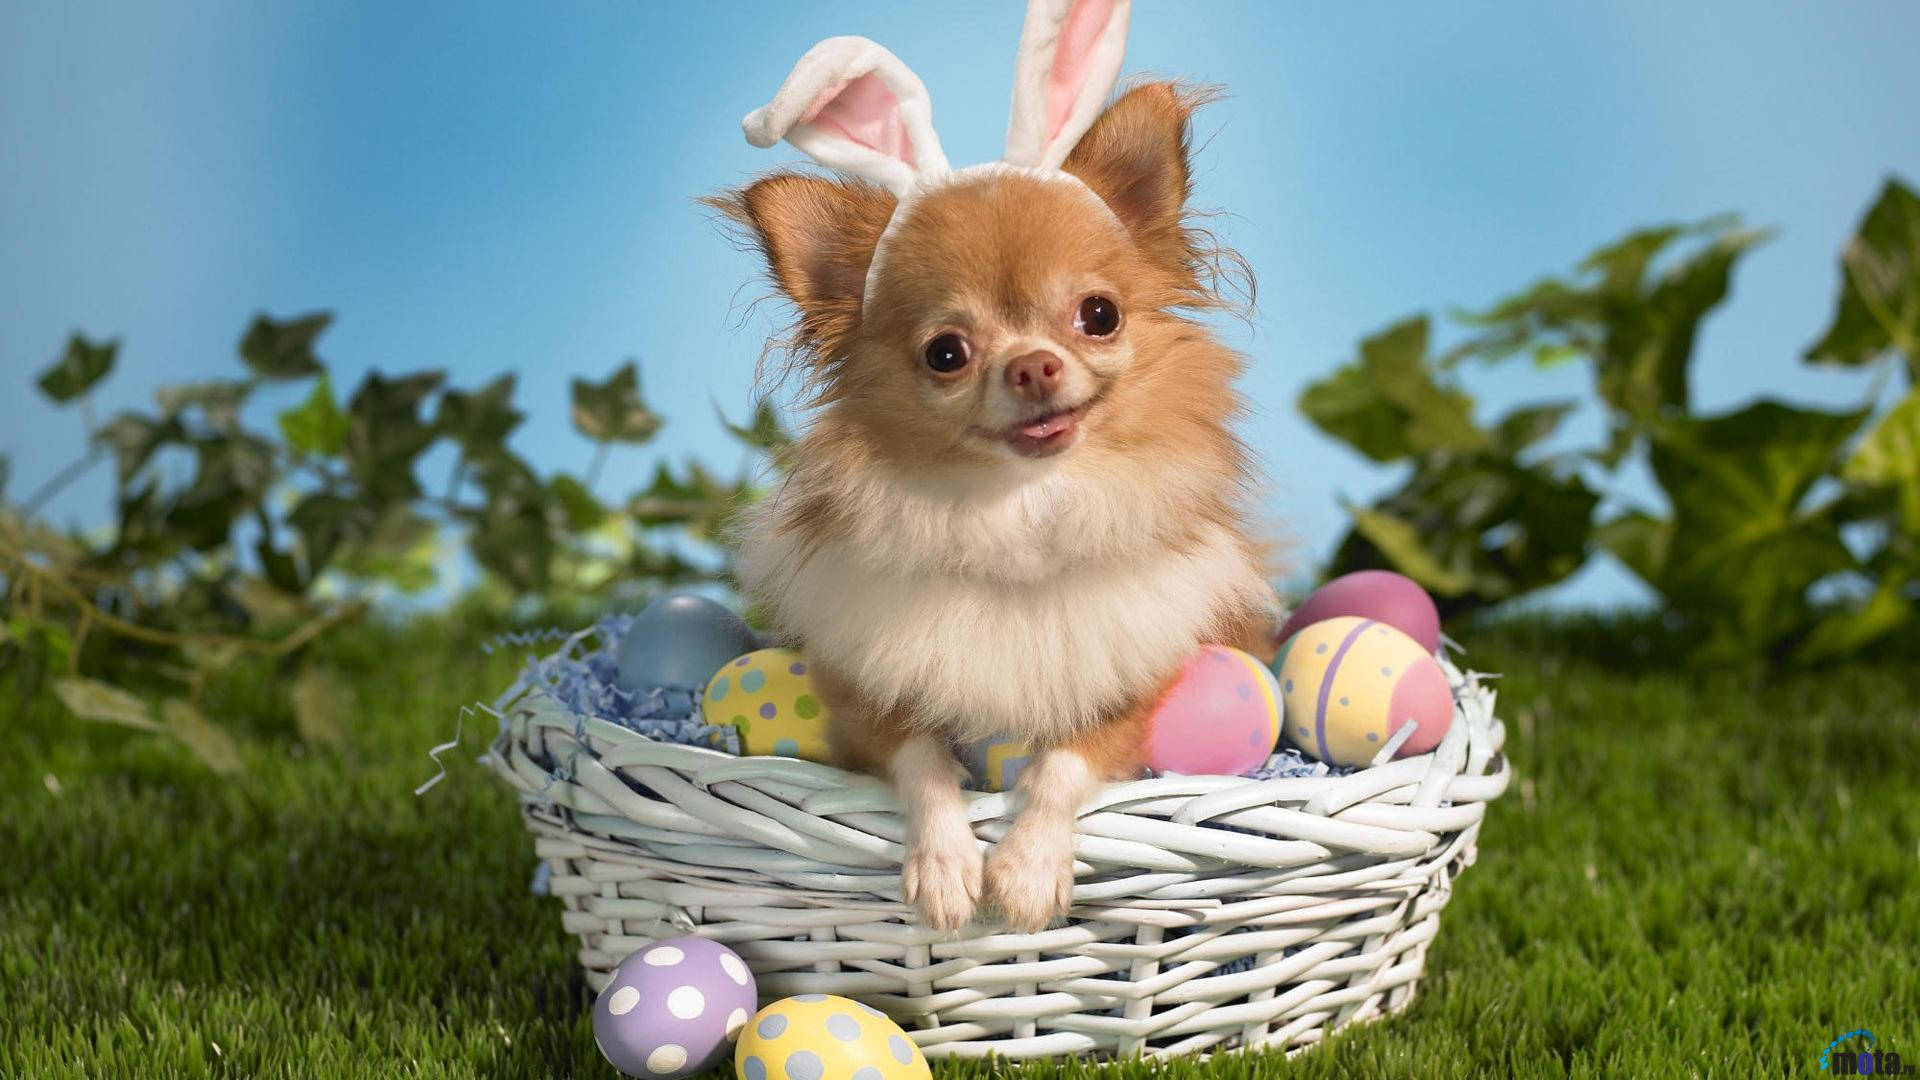 Fluffy dog with bunny ears on Easter eggs basket wallpaper